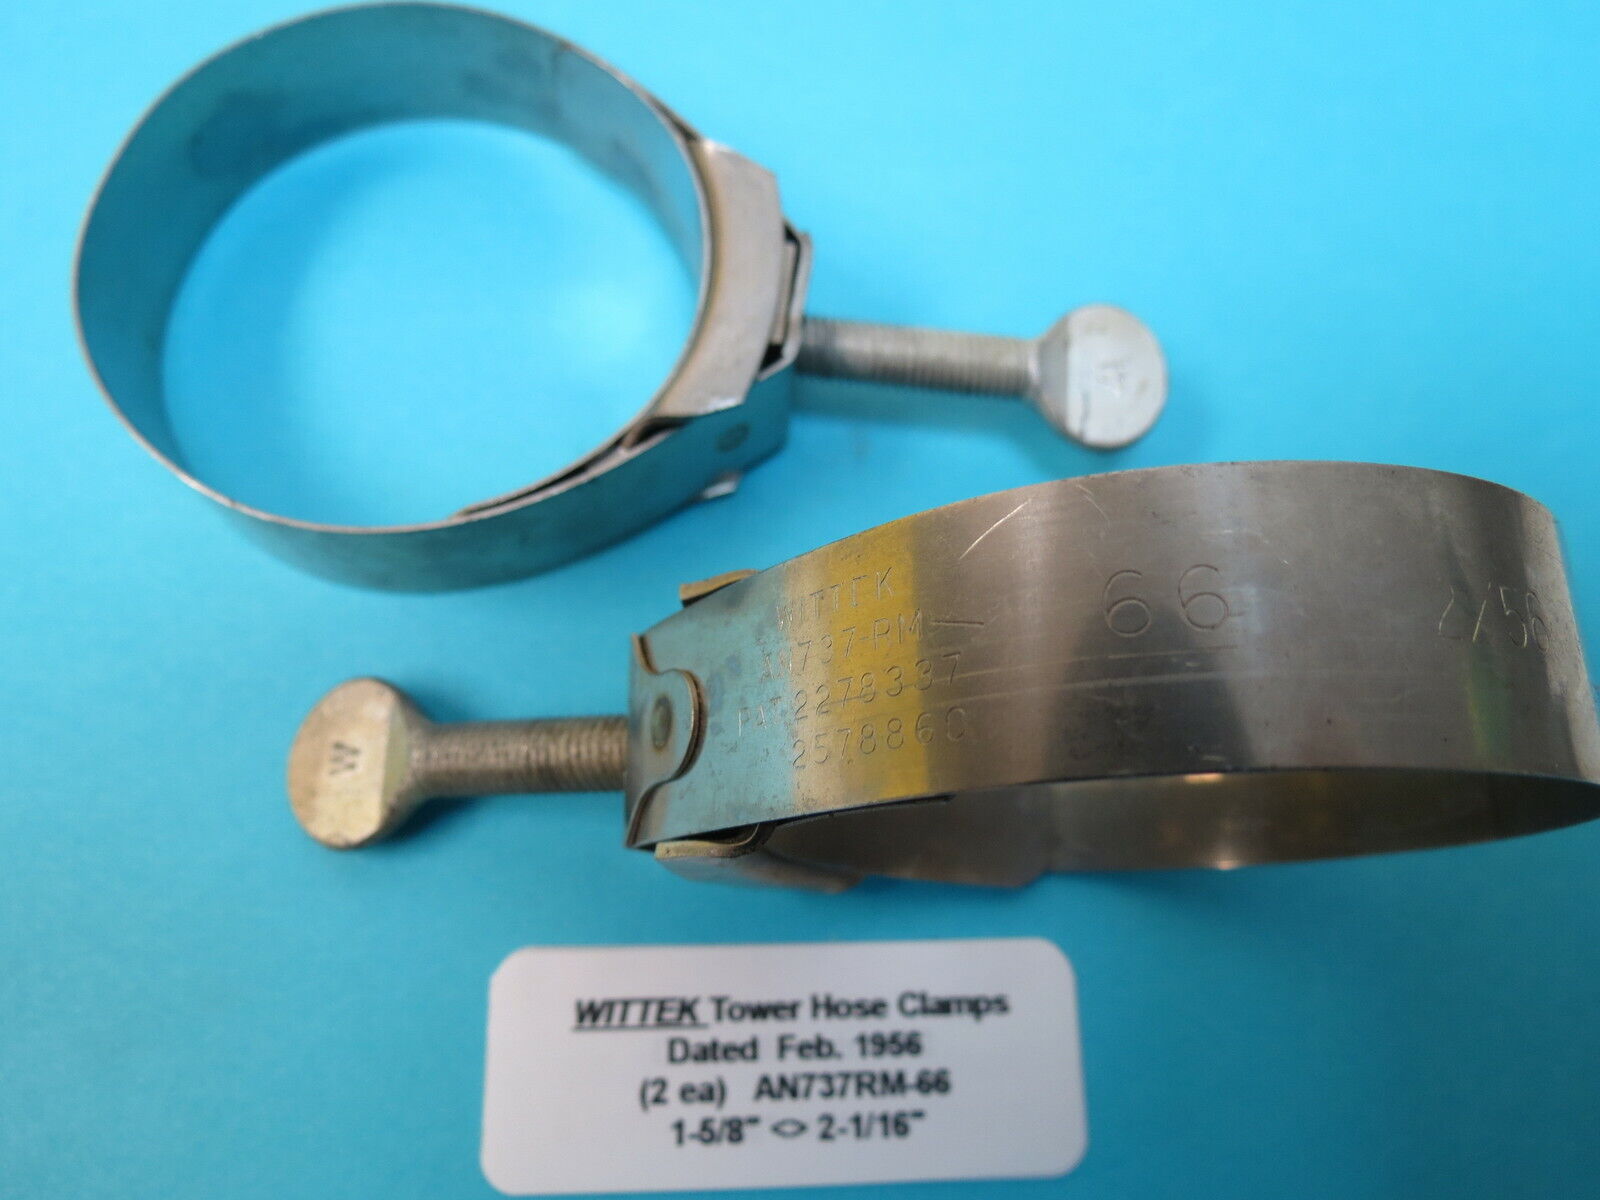 1956 Wittek #66 Vintage Tower Hose Clamps Dated 2/56 Dia. 1-5/8”>2-1/16” New (2)